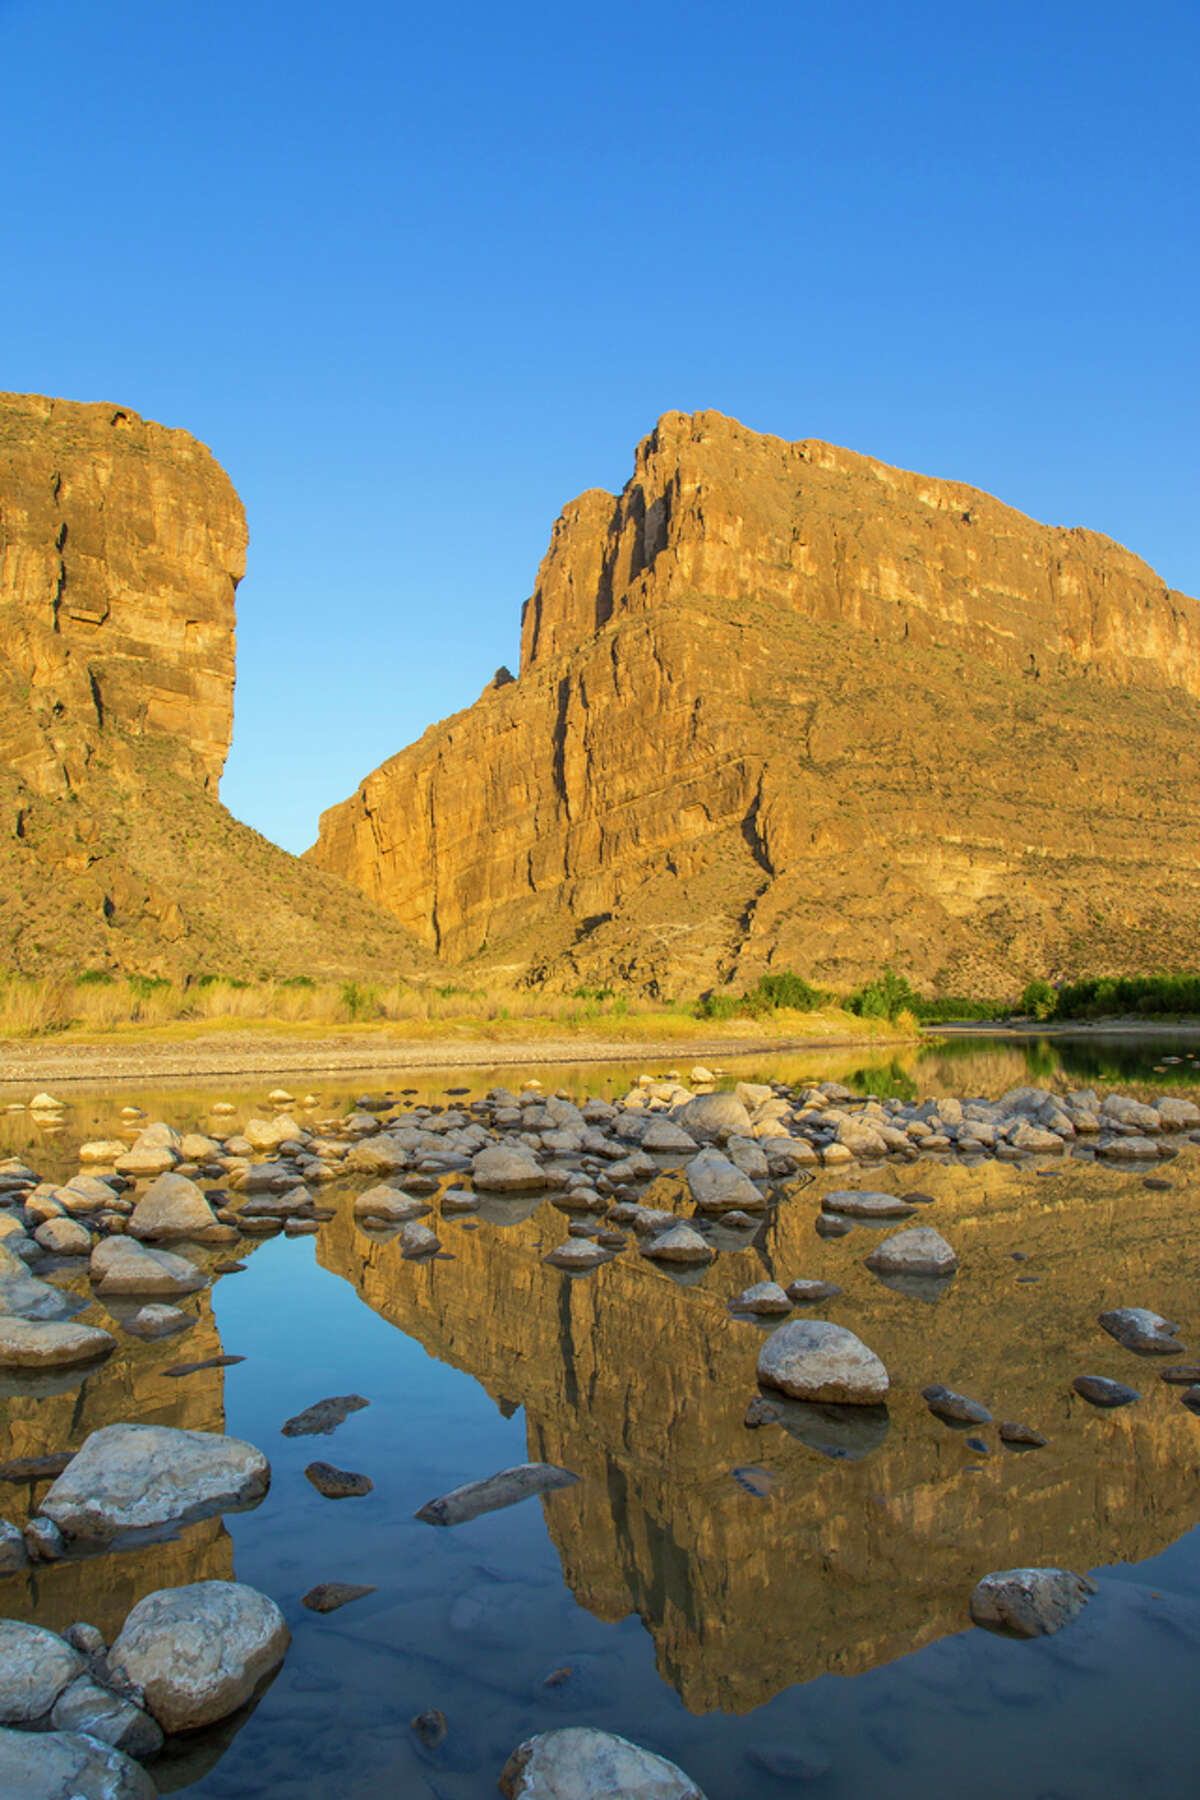 16 cool things you probably didn't know about Big Bend National Park